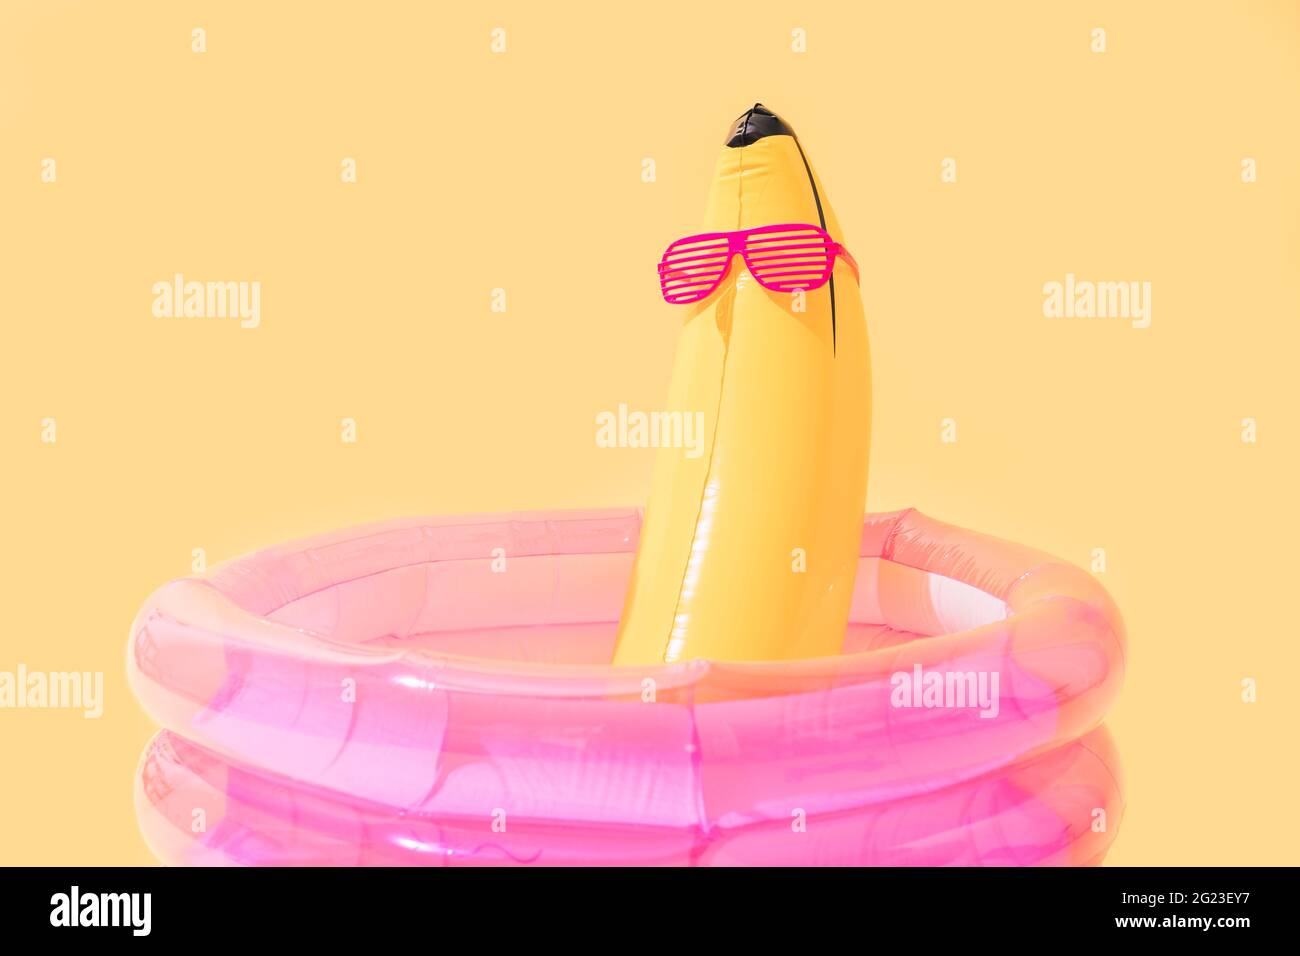 children's pool with a banana-shaped inflatable banana with sunglasses on a yellow background. Stock Photo